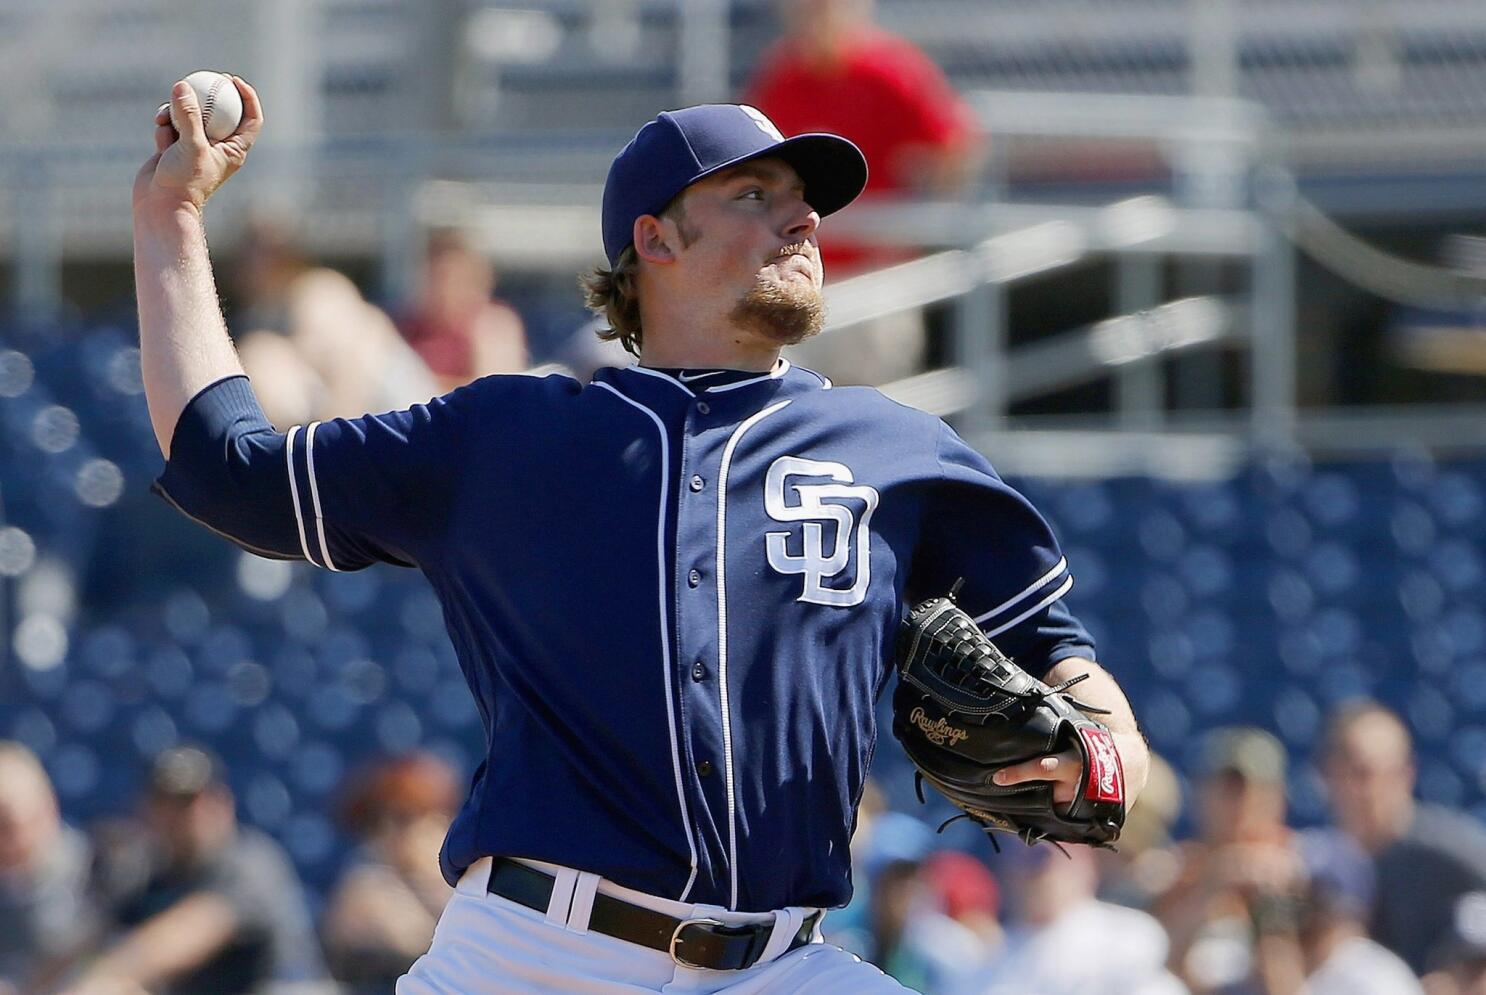 Somehow, the San Diego Padres turned James Shields into Fernando